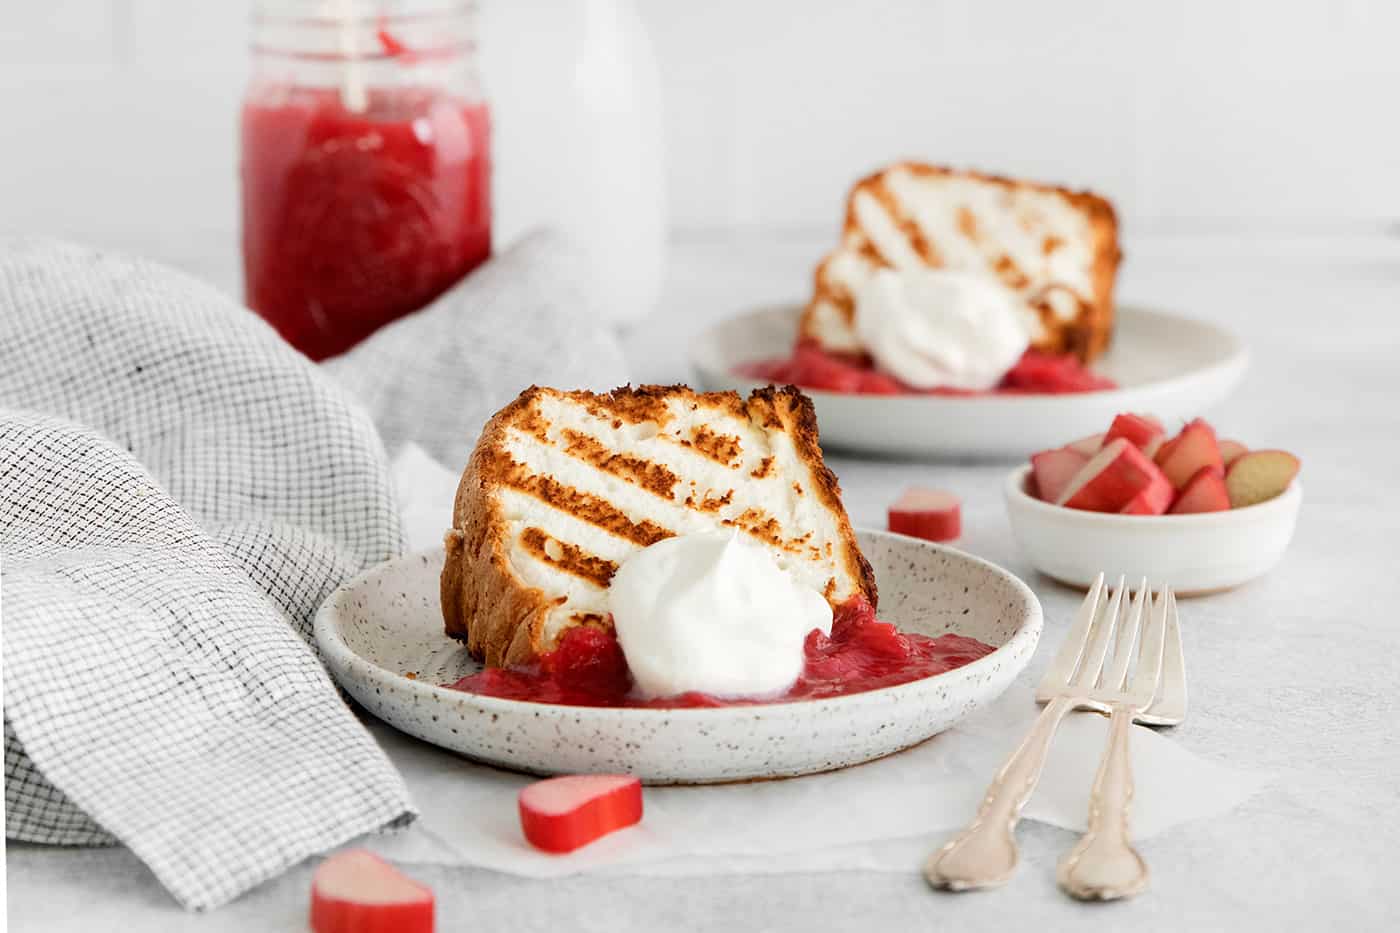 Grilled angel food cake with rhubarb sauce and whipped cream